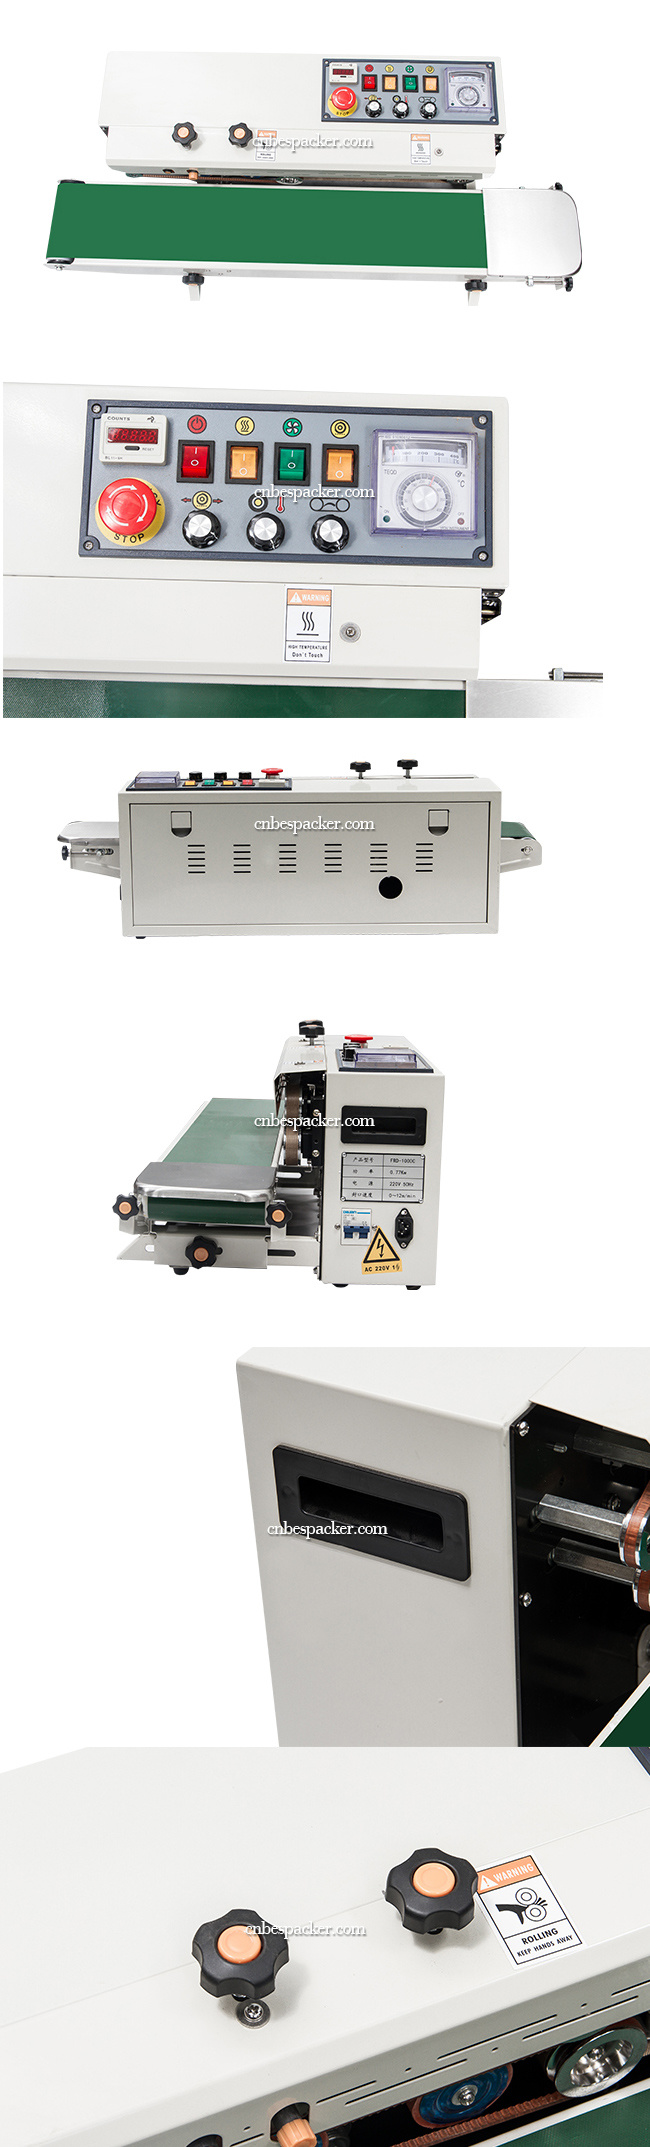 Table-Top Continuous Poly Bag Sealing Machine